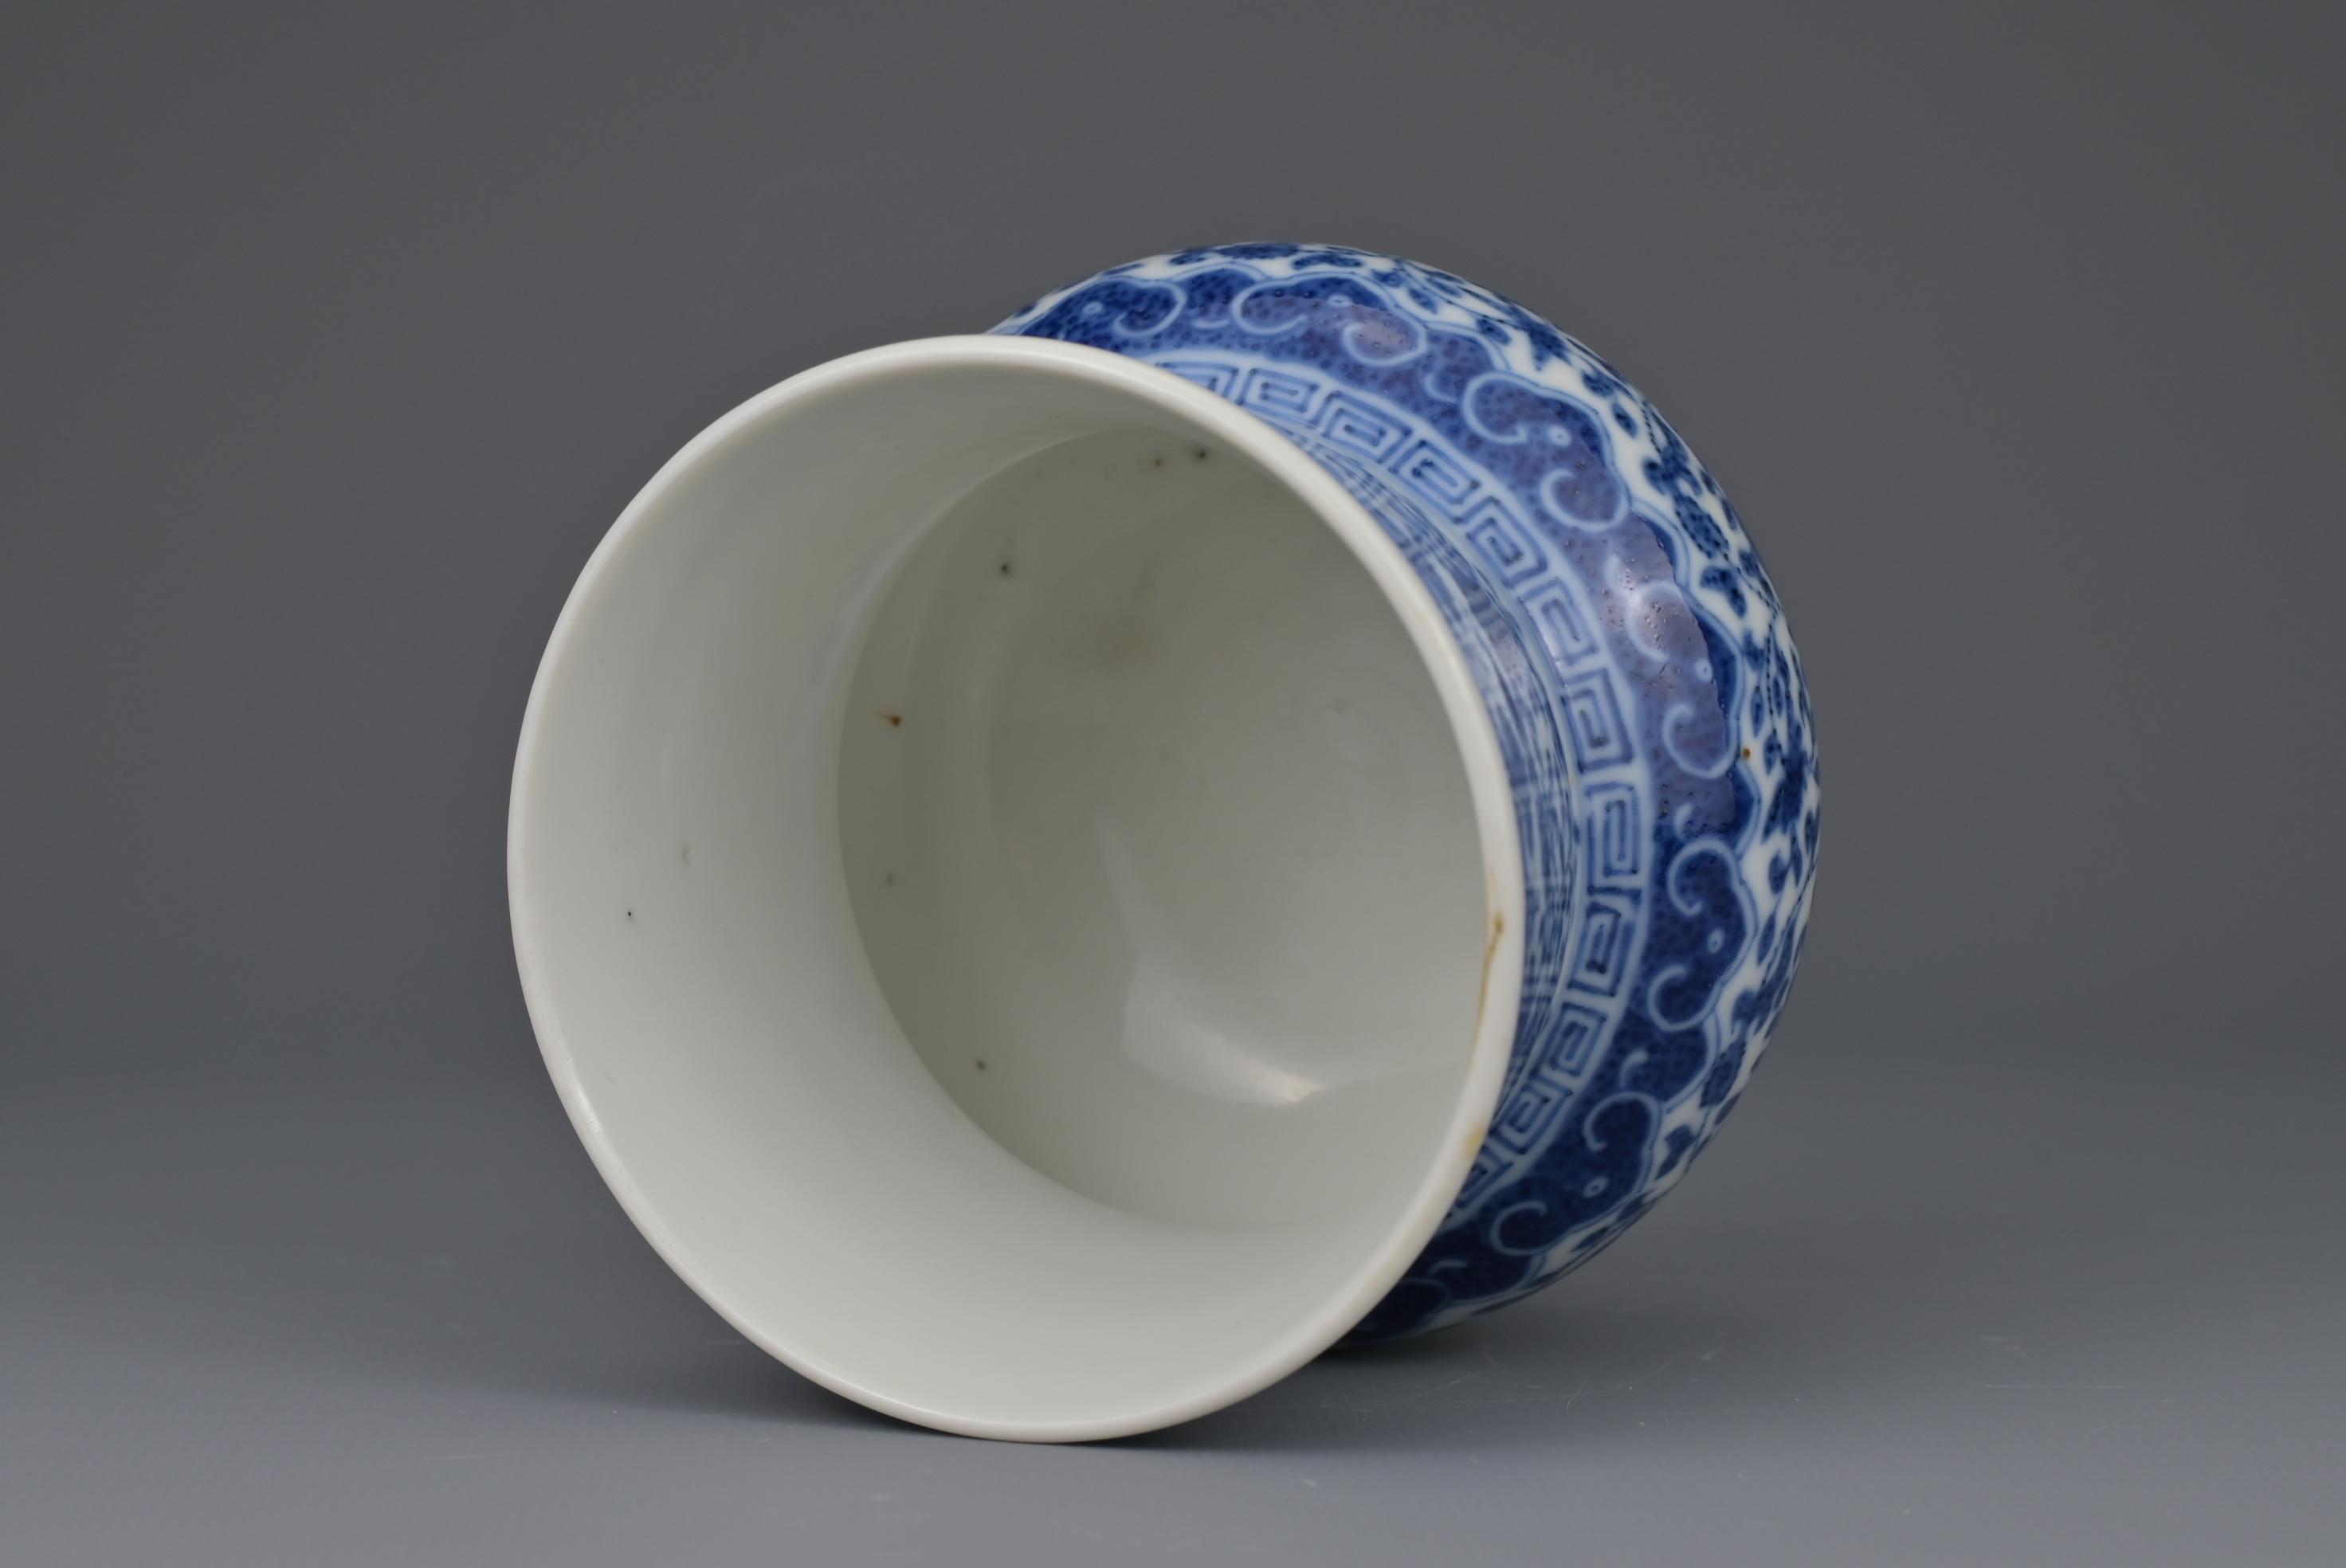 CHINESE BLUE AND WHITE PORCELAIN SPITTOON ‘ZHADOU’, TONGZHI PERIOD OR EARLIER, 19th CENTURY - Image 7 of 8